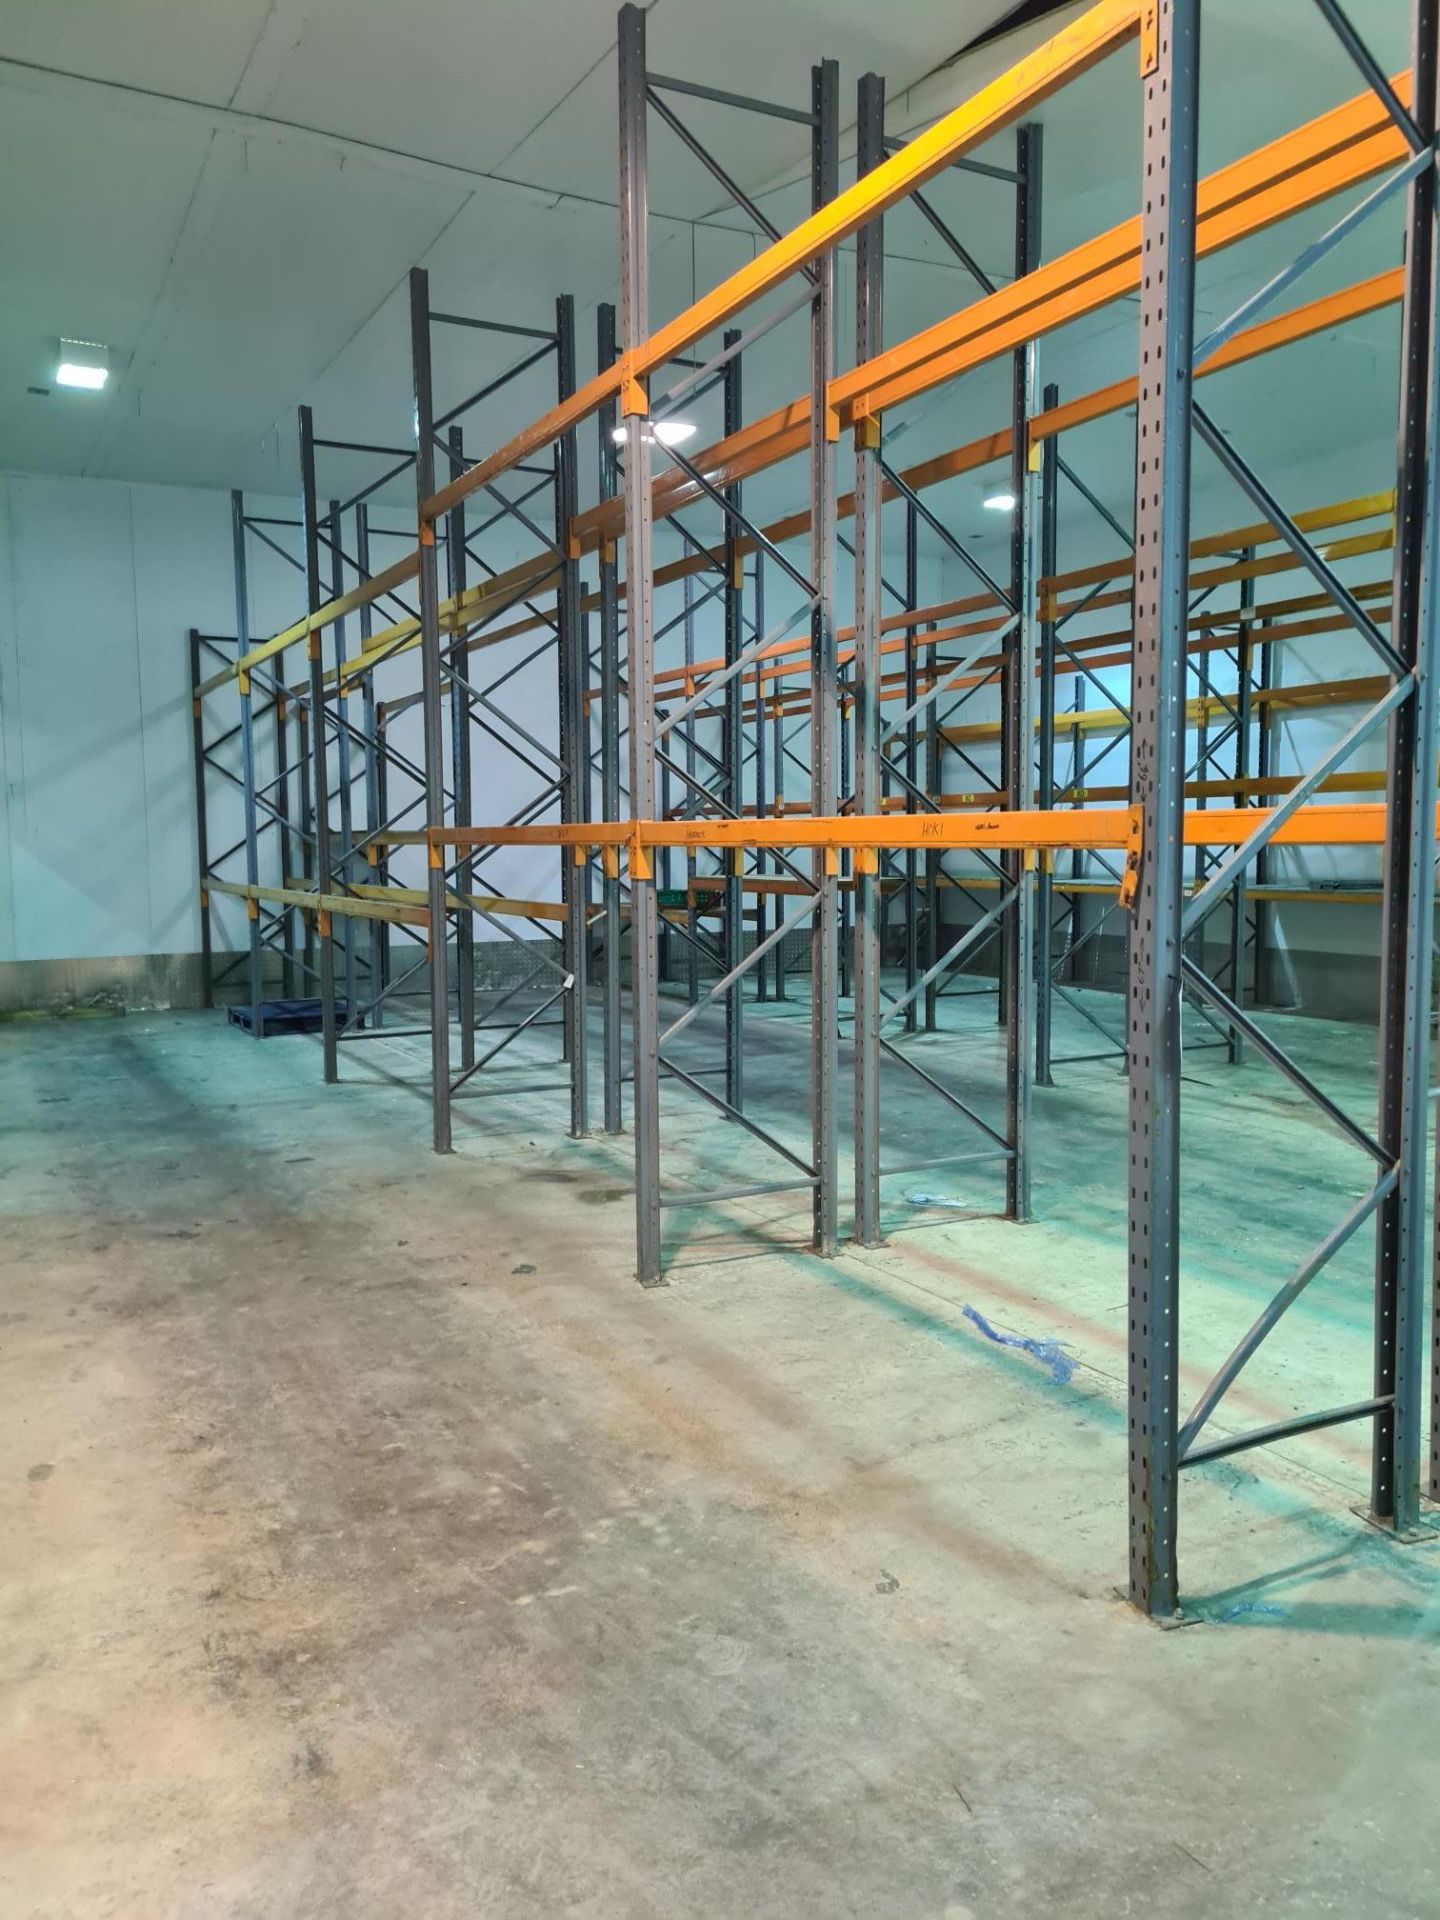 15 Bays of Boltless Steel Racking , Approx. 1.8m x 0.9m x 3.65m (Method Statement and Risk